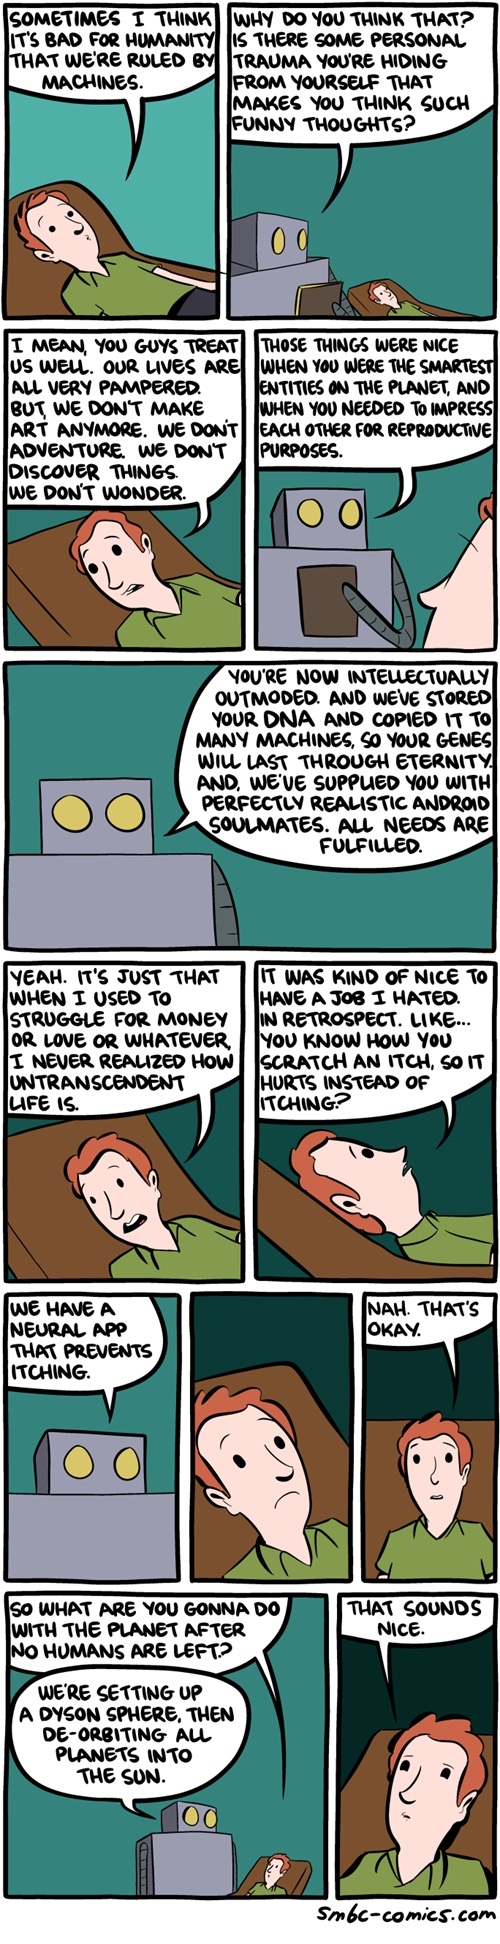 Ruled by machines